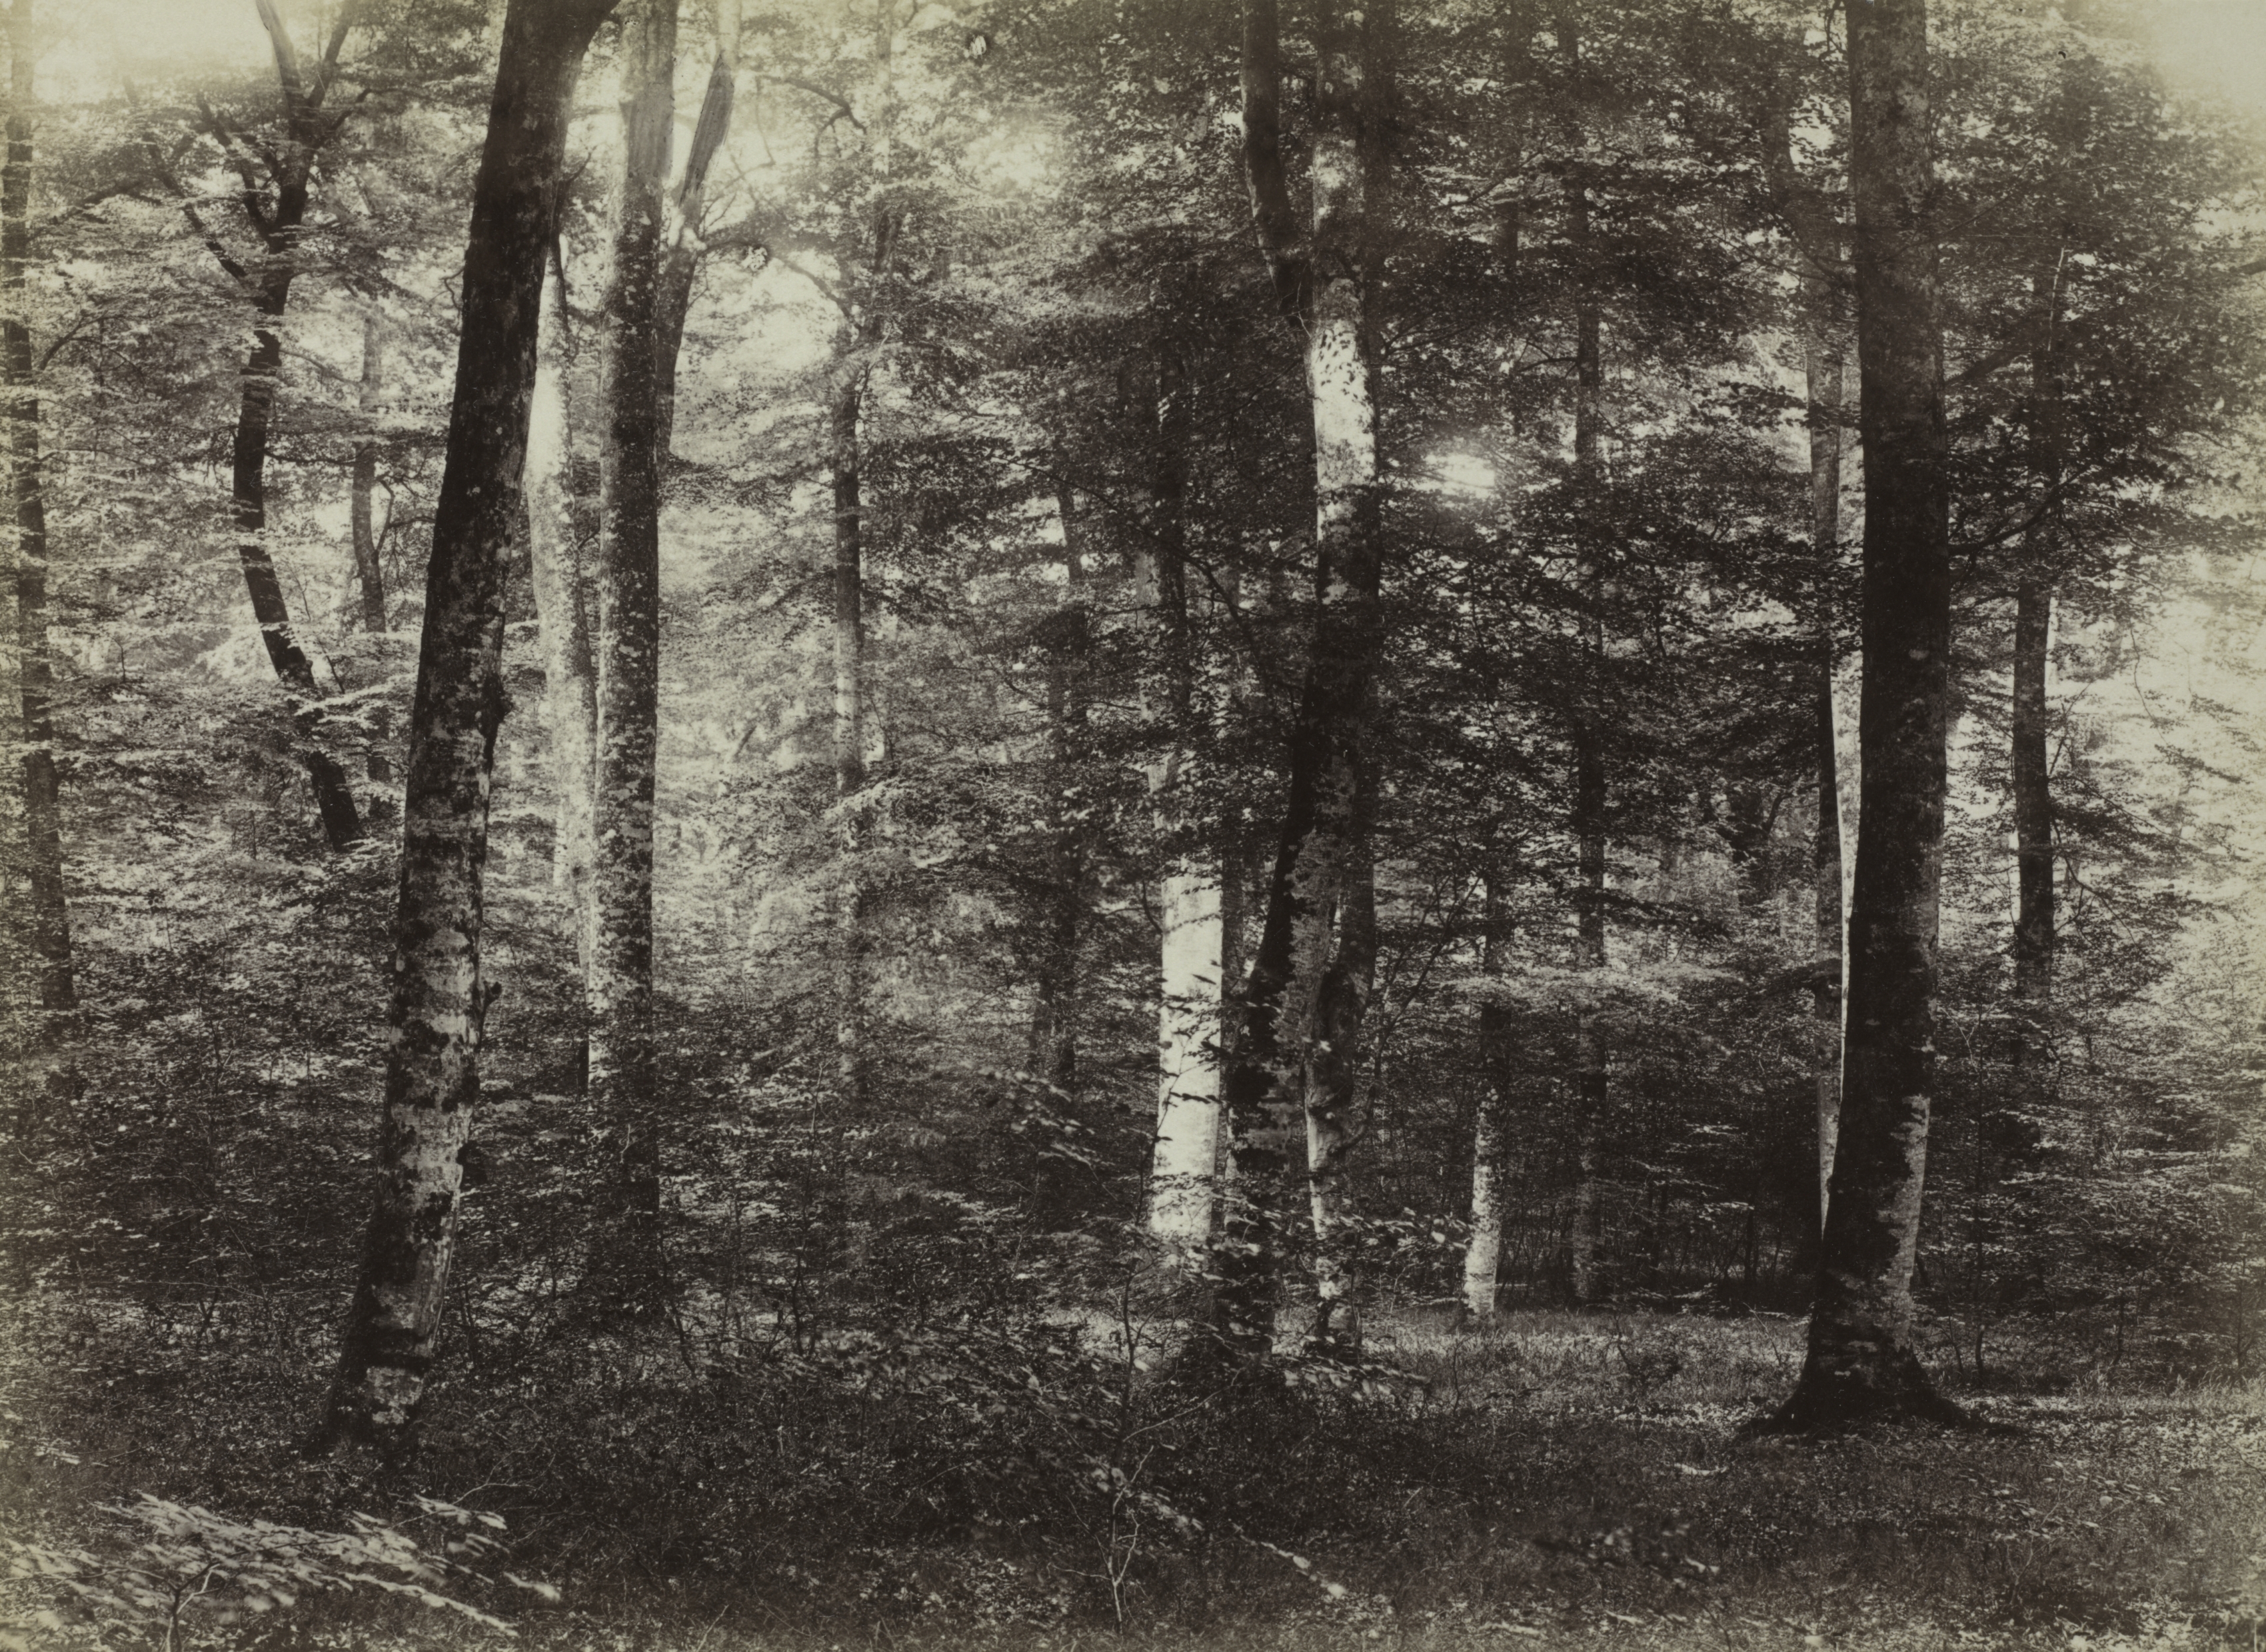 Untitled (The Forest of Fontainebleau)